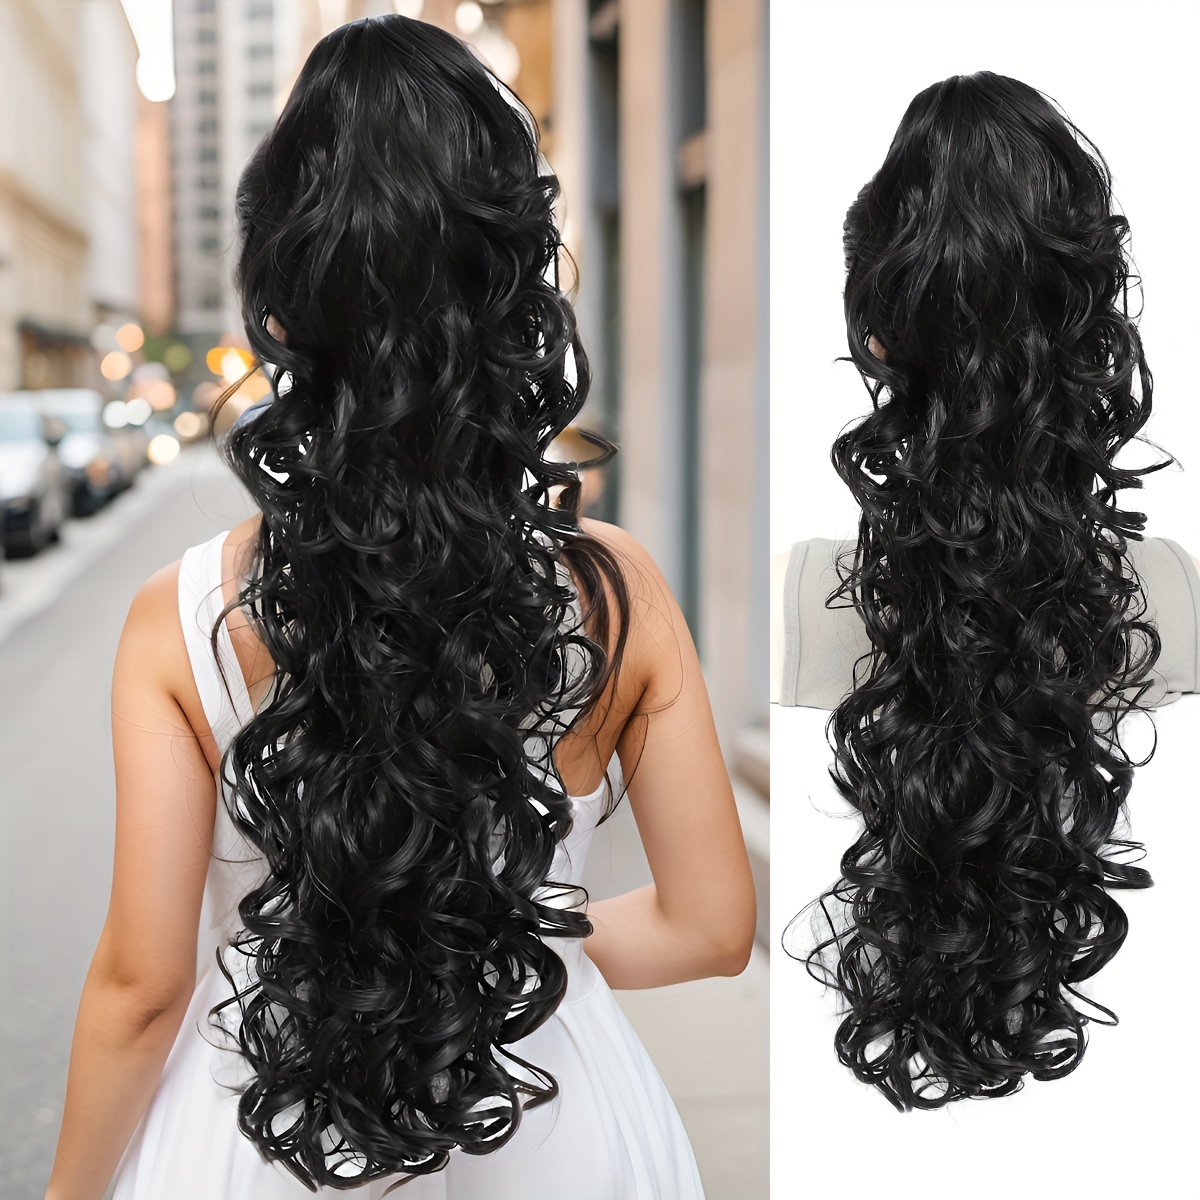 

Claw Ponytail Long Curly Wavy Ponytail Extensions Synthetic Clip In Hair Extensions Elegant For Daily Use Hair Accessories